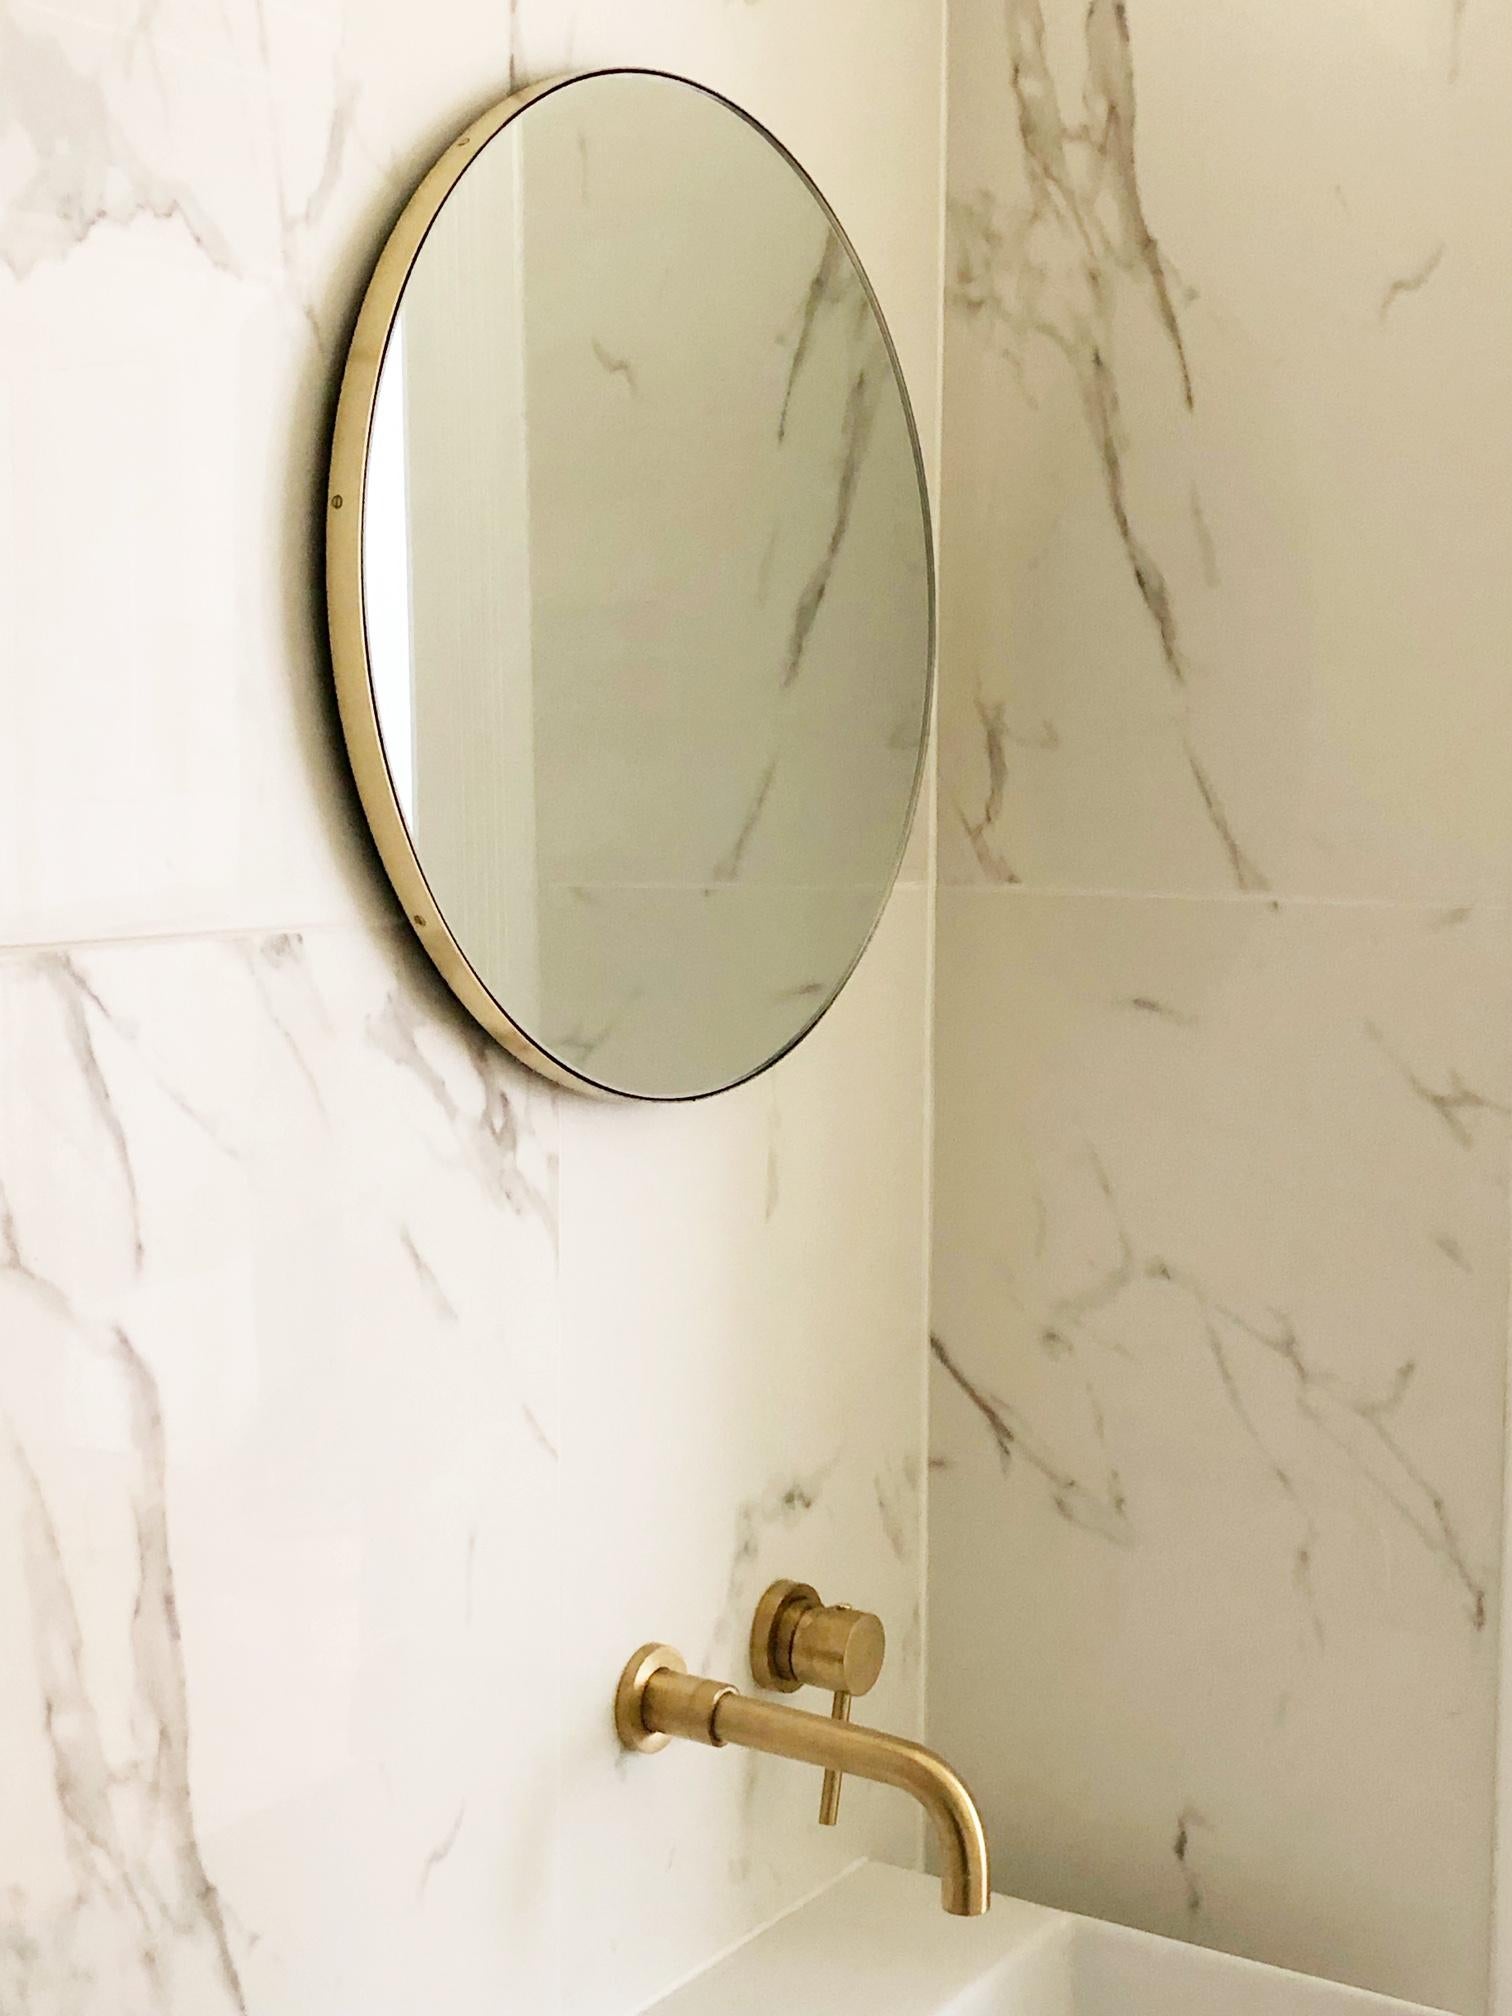 Minimalist Orbis™ round mirror with an elegant solid brushed brass frame. The detailing and finish, including visible brass screws, emphasise the crafty and quality feel of the mirror, a true signature of our brand. Designed and handcrafted in